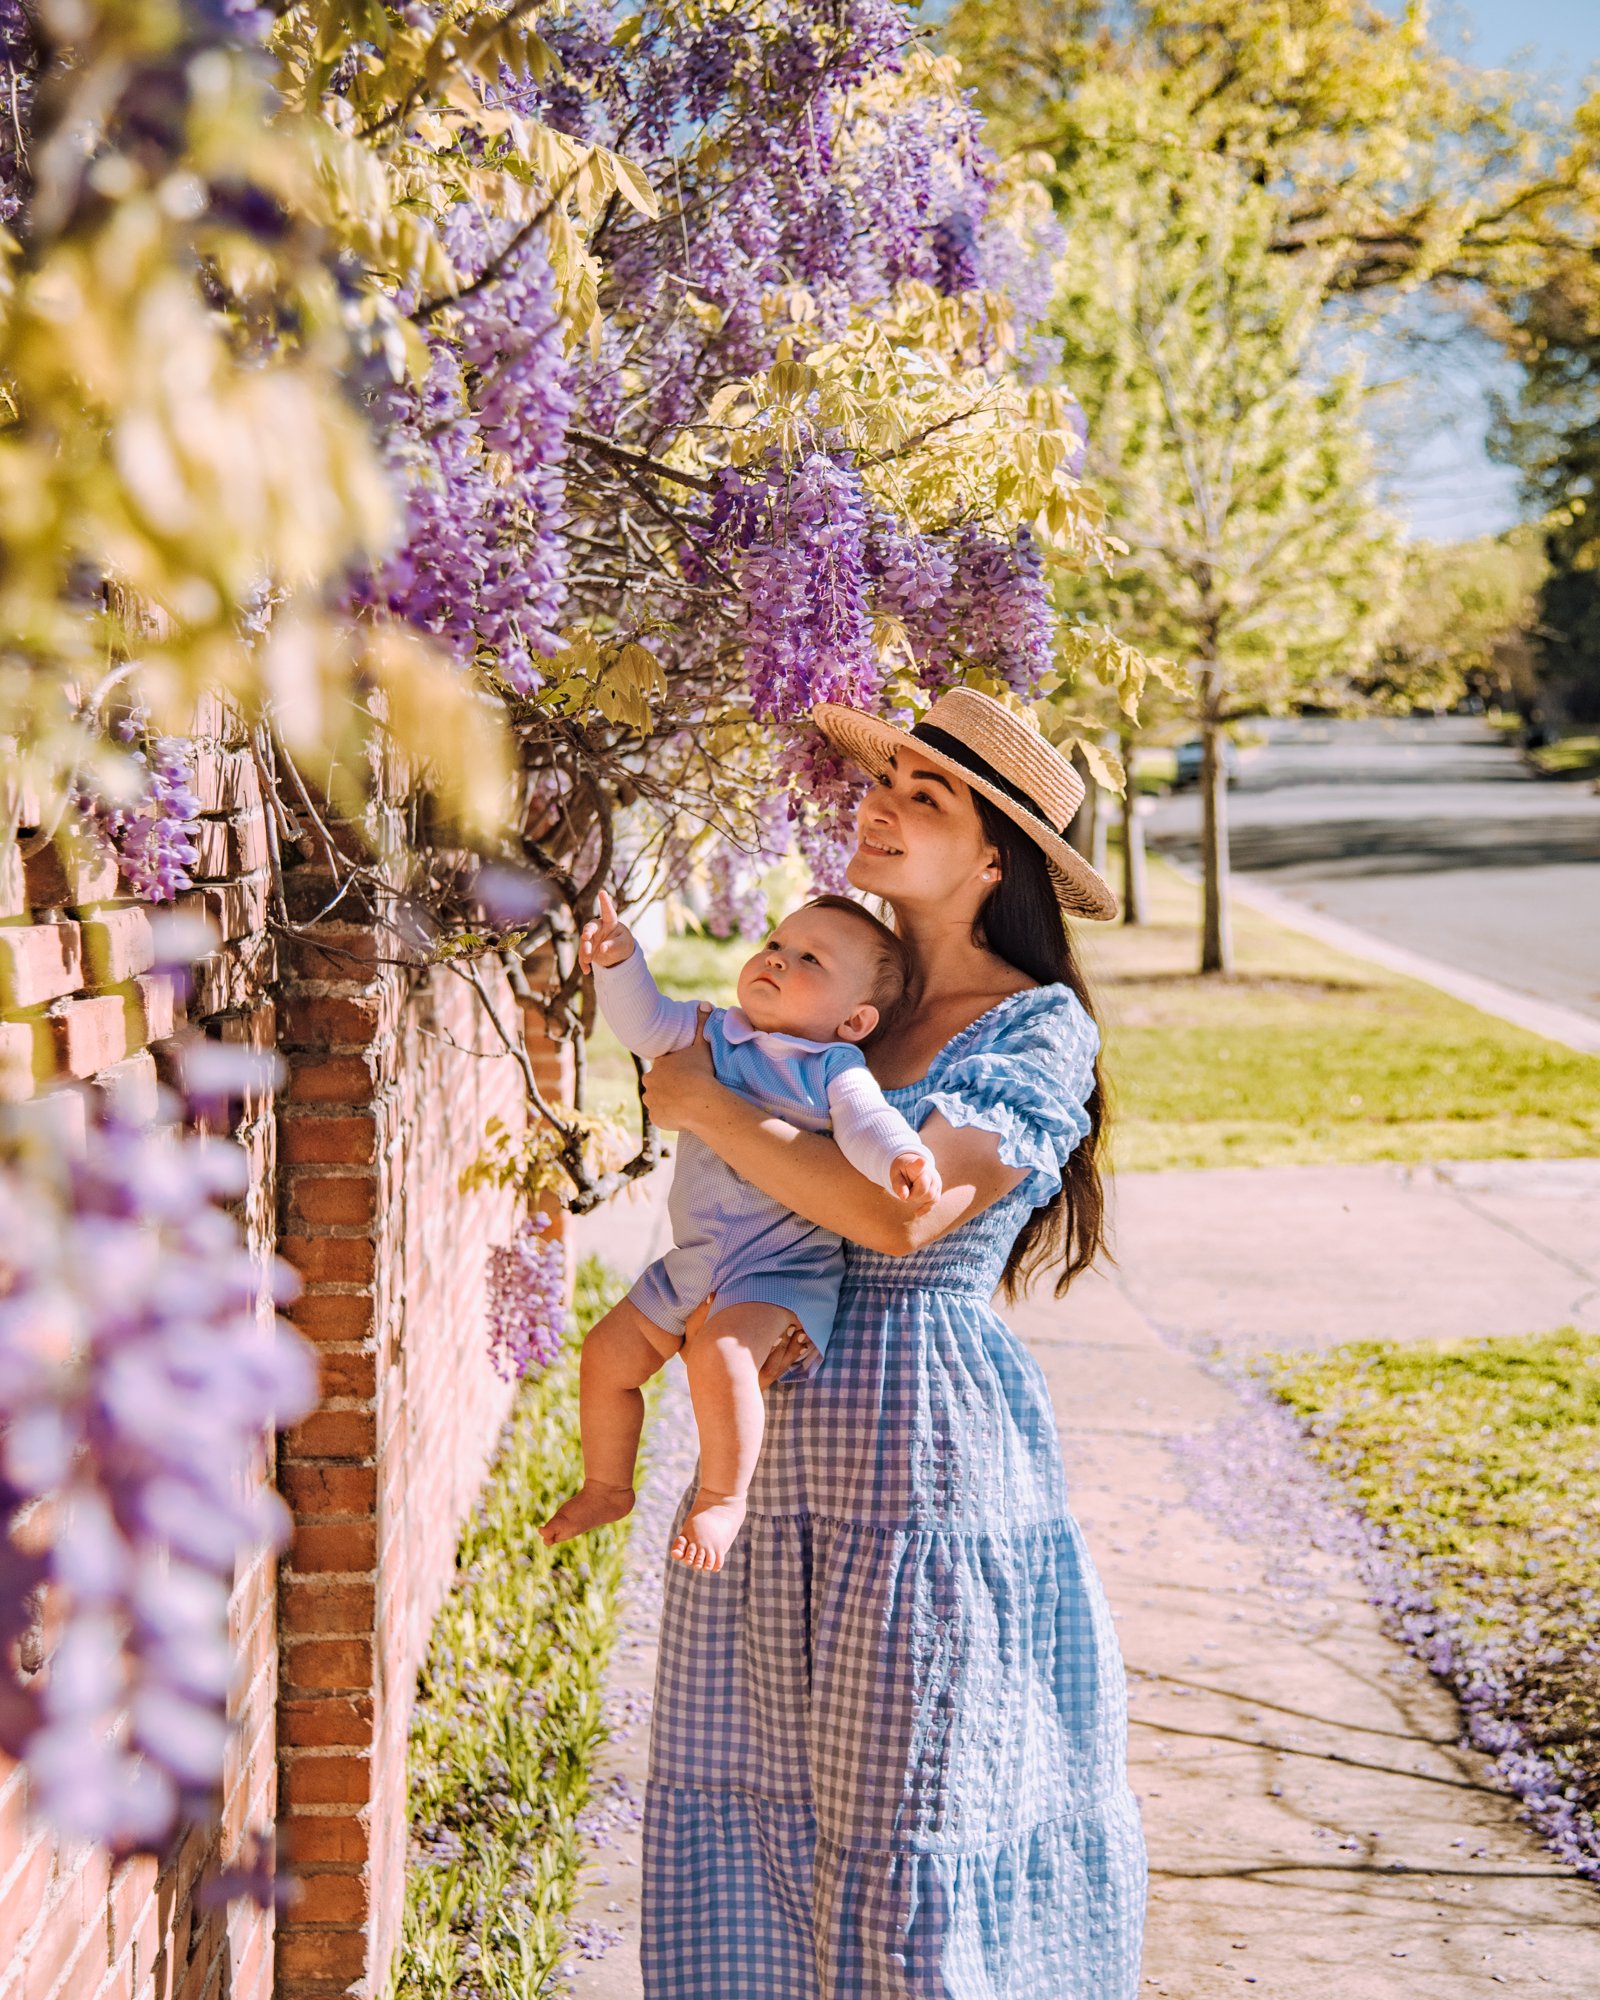 Spring Baby Photoshoot Ideas Intro Image - Mom and Baby Next to Wisteria